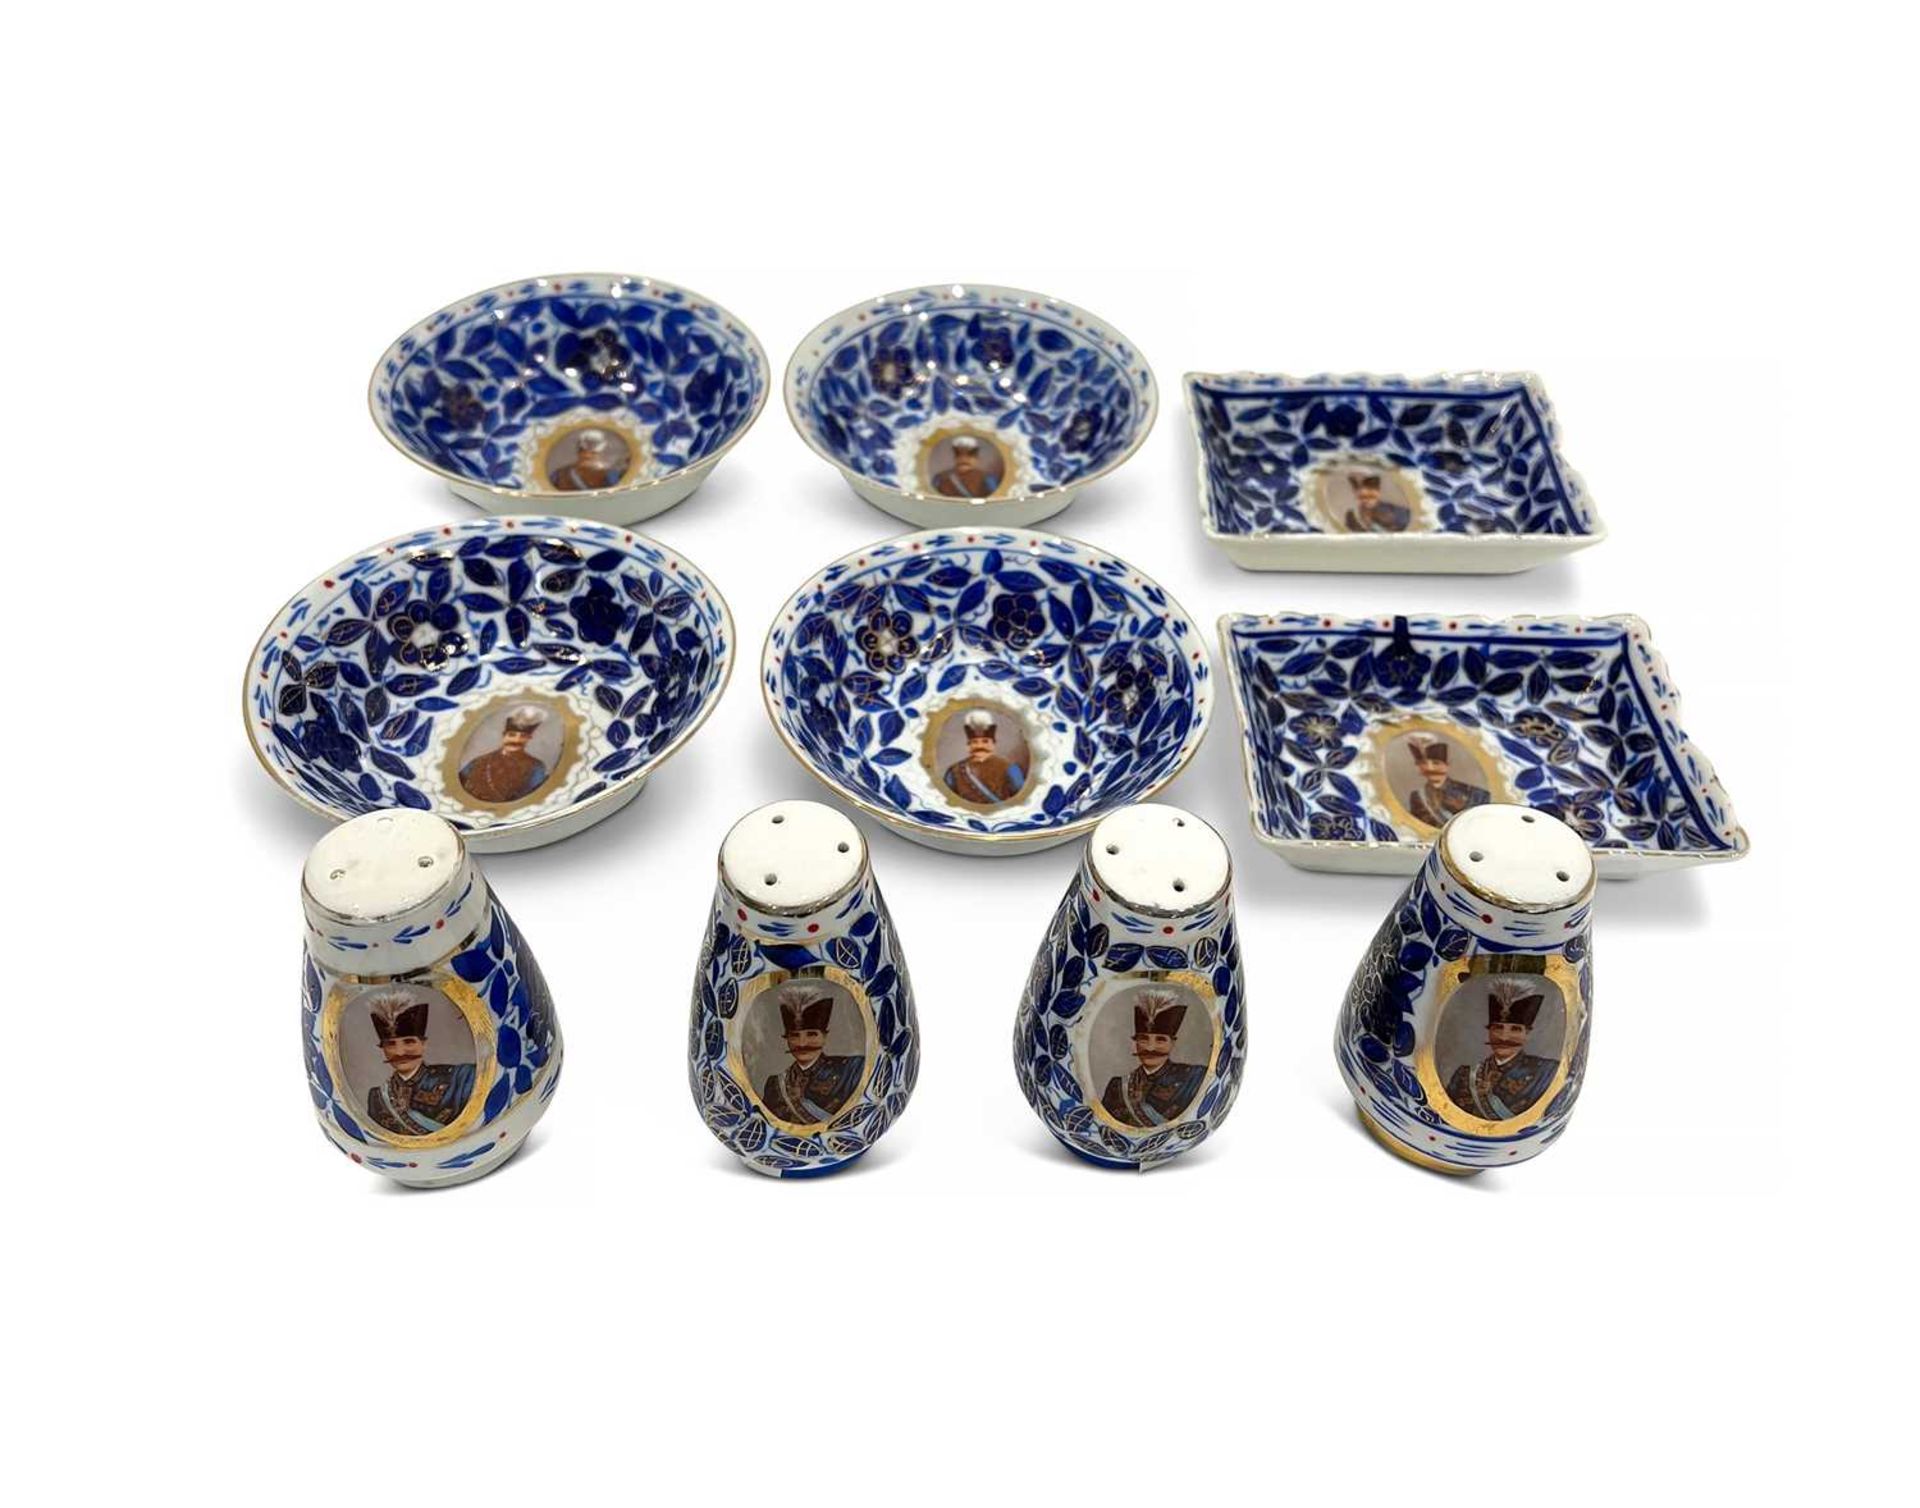 A RUSSIAN PORCELAIN SALT AND PEPPER SET TOGETHER WITH OTHER ITEMS MADE FOR THE PERSIAN MARKET